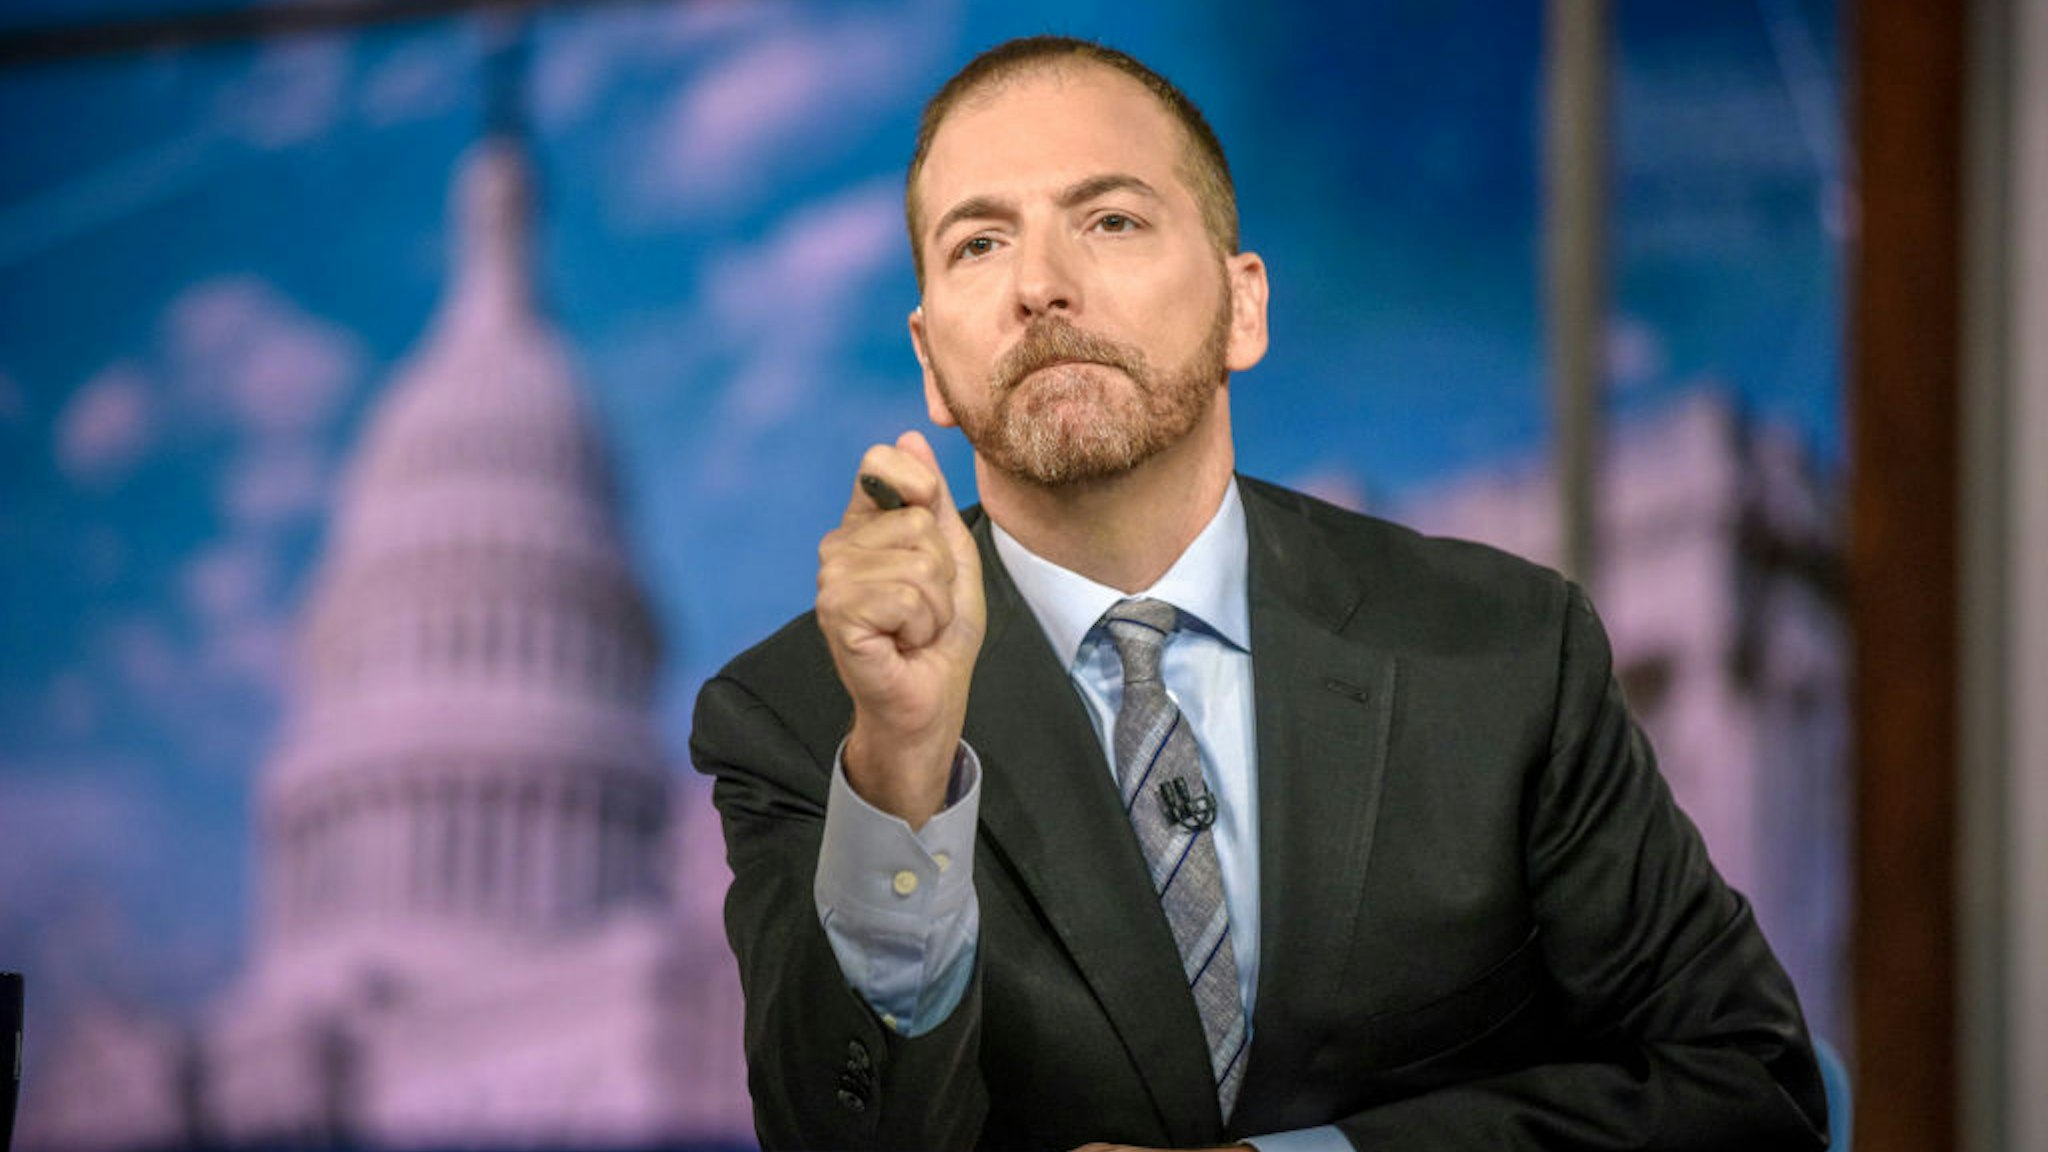 Moderator Chuck Todd appears on "Meet the Press" in Washington, D.C., Sunday August 4, 2019.